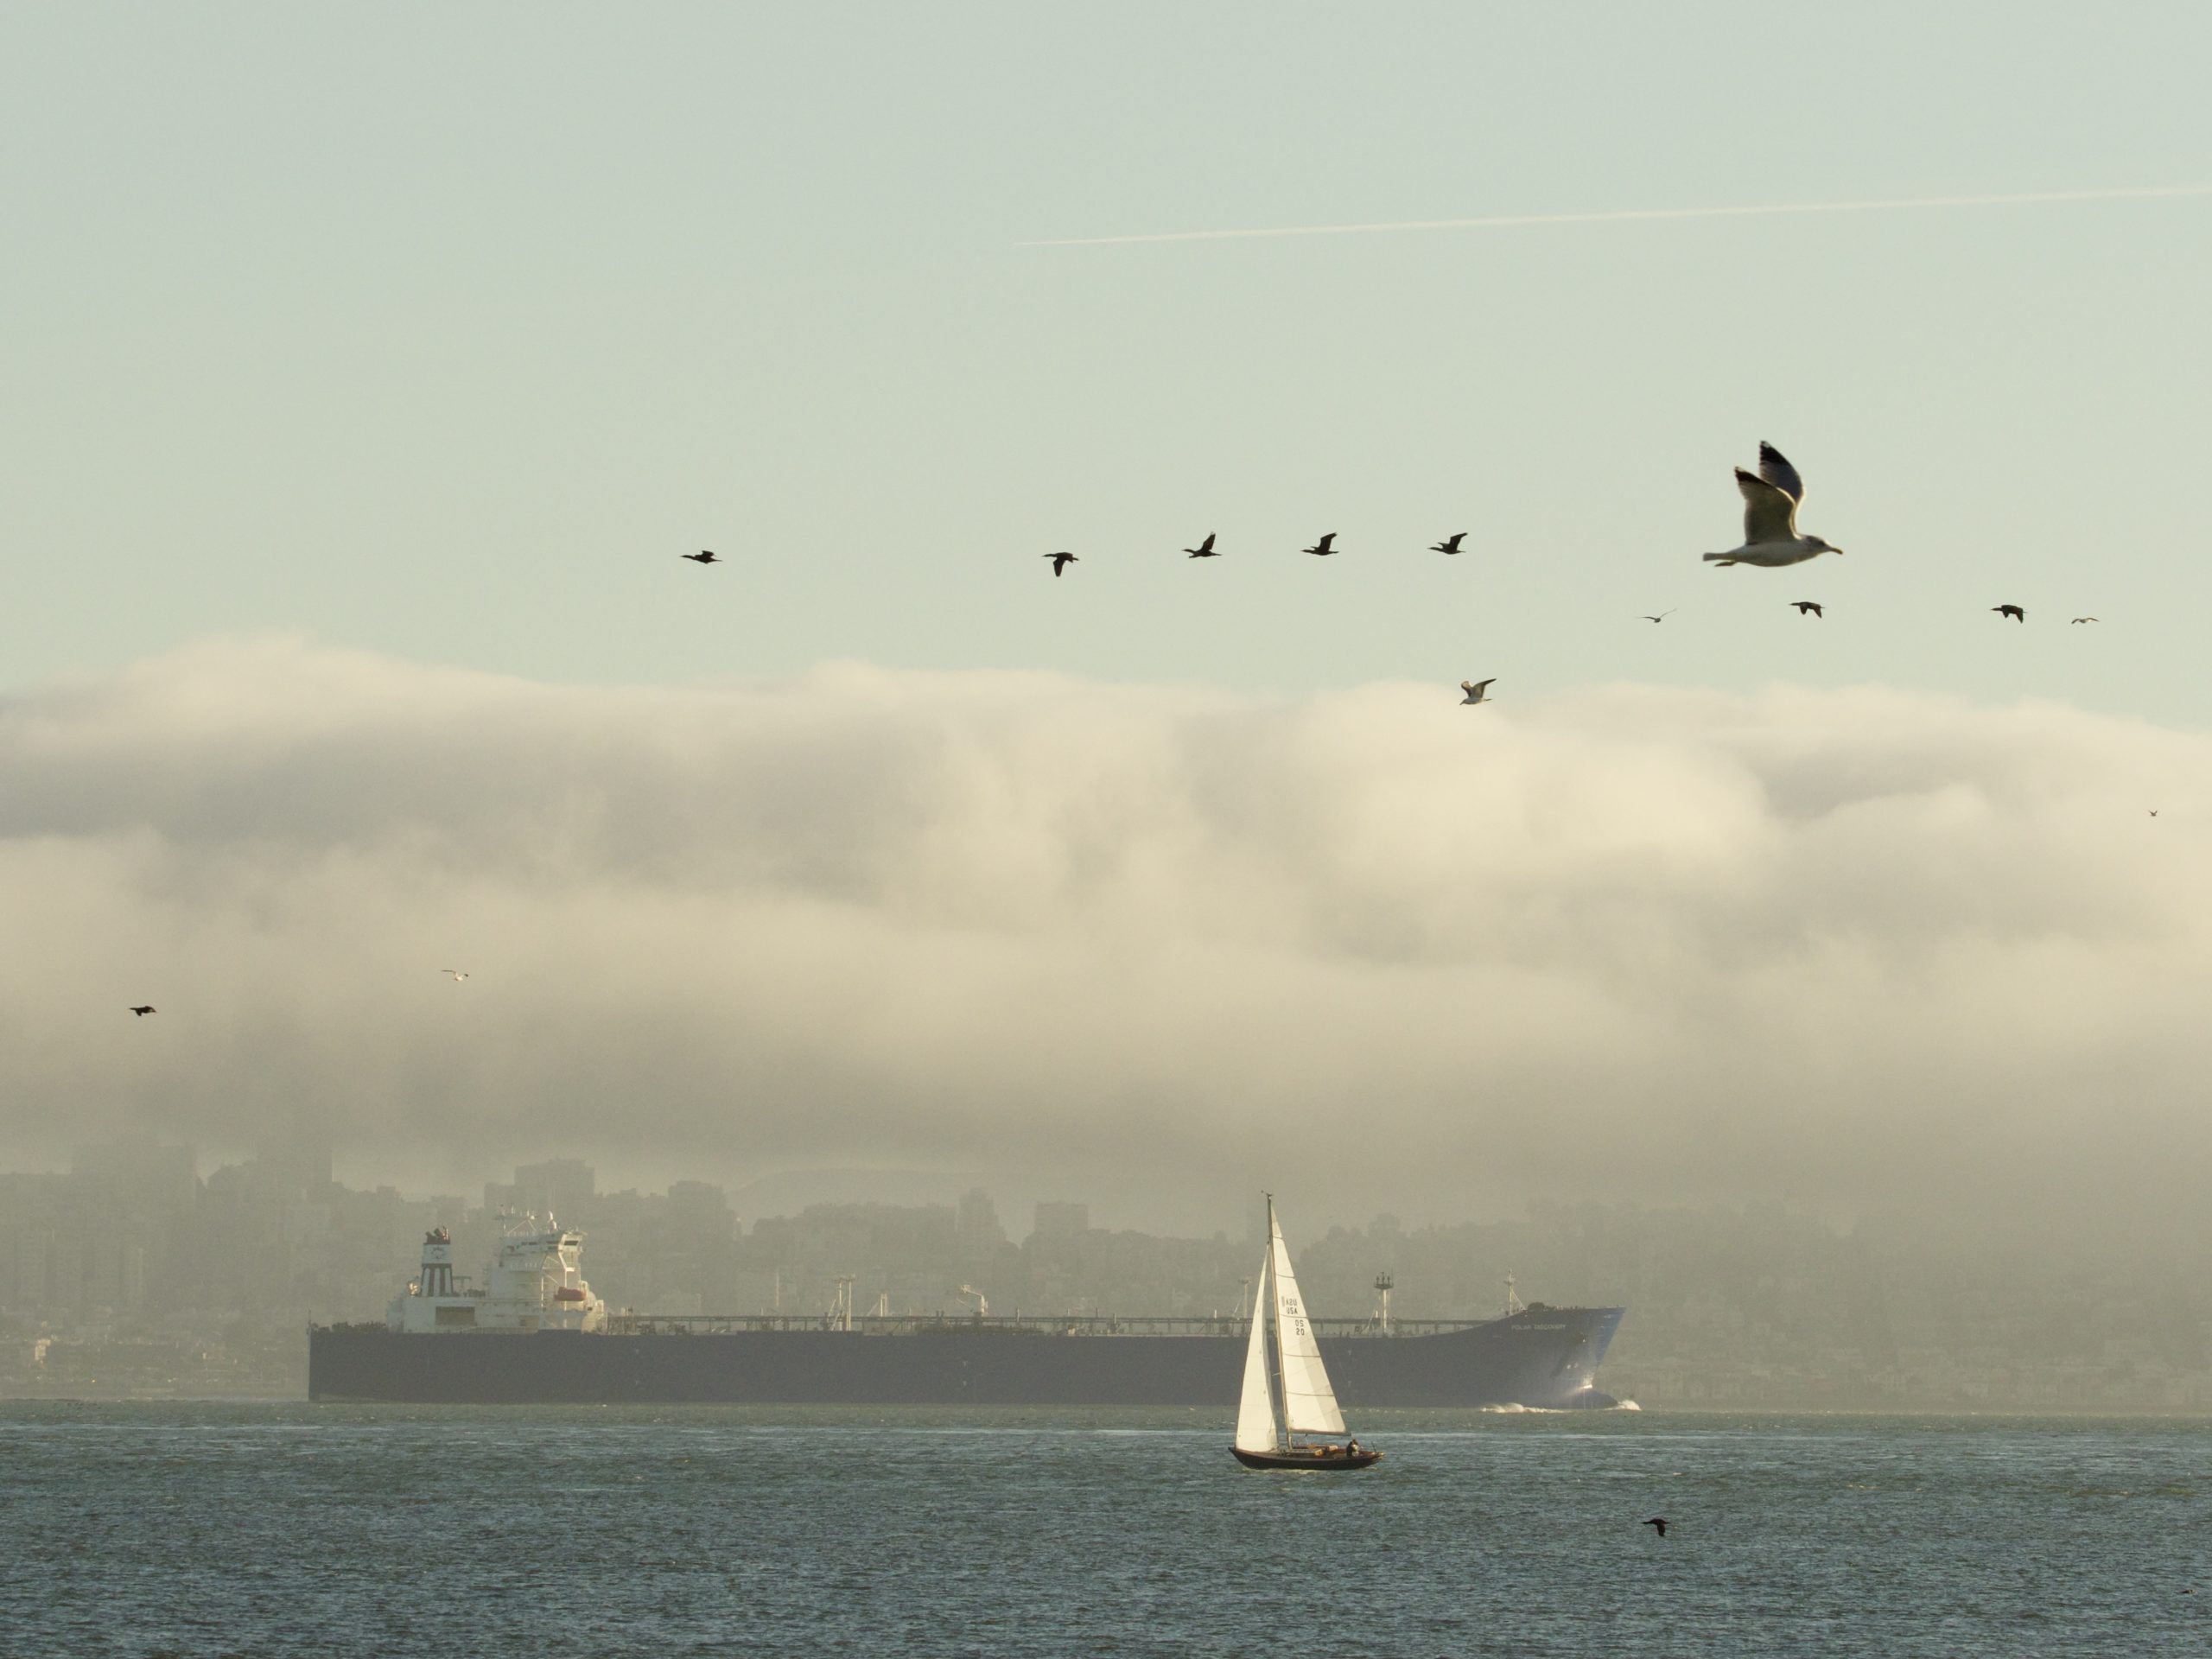 Birds in Silhouette over vessels on San Francisco Bay